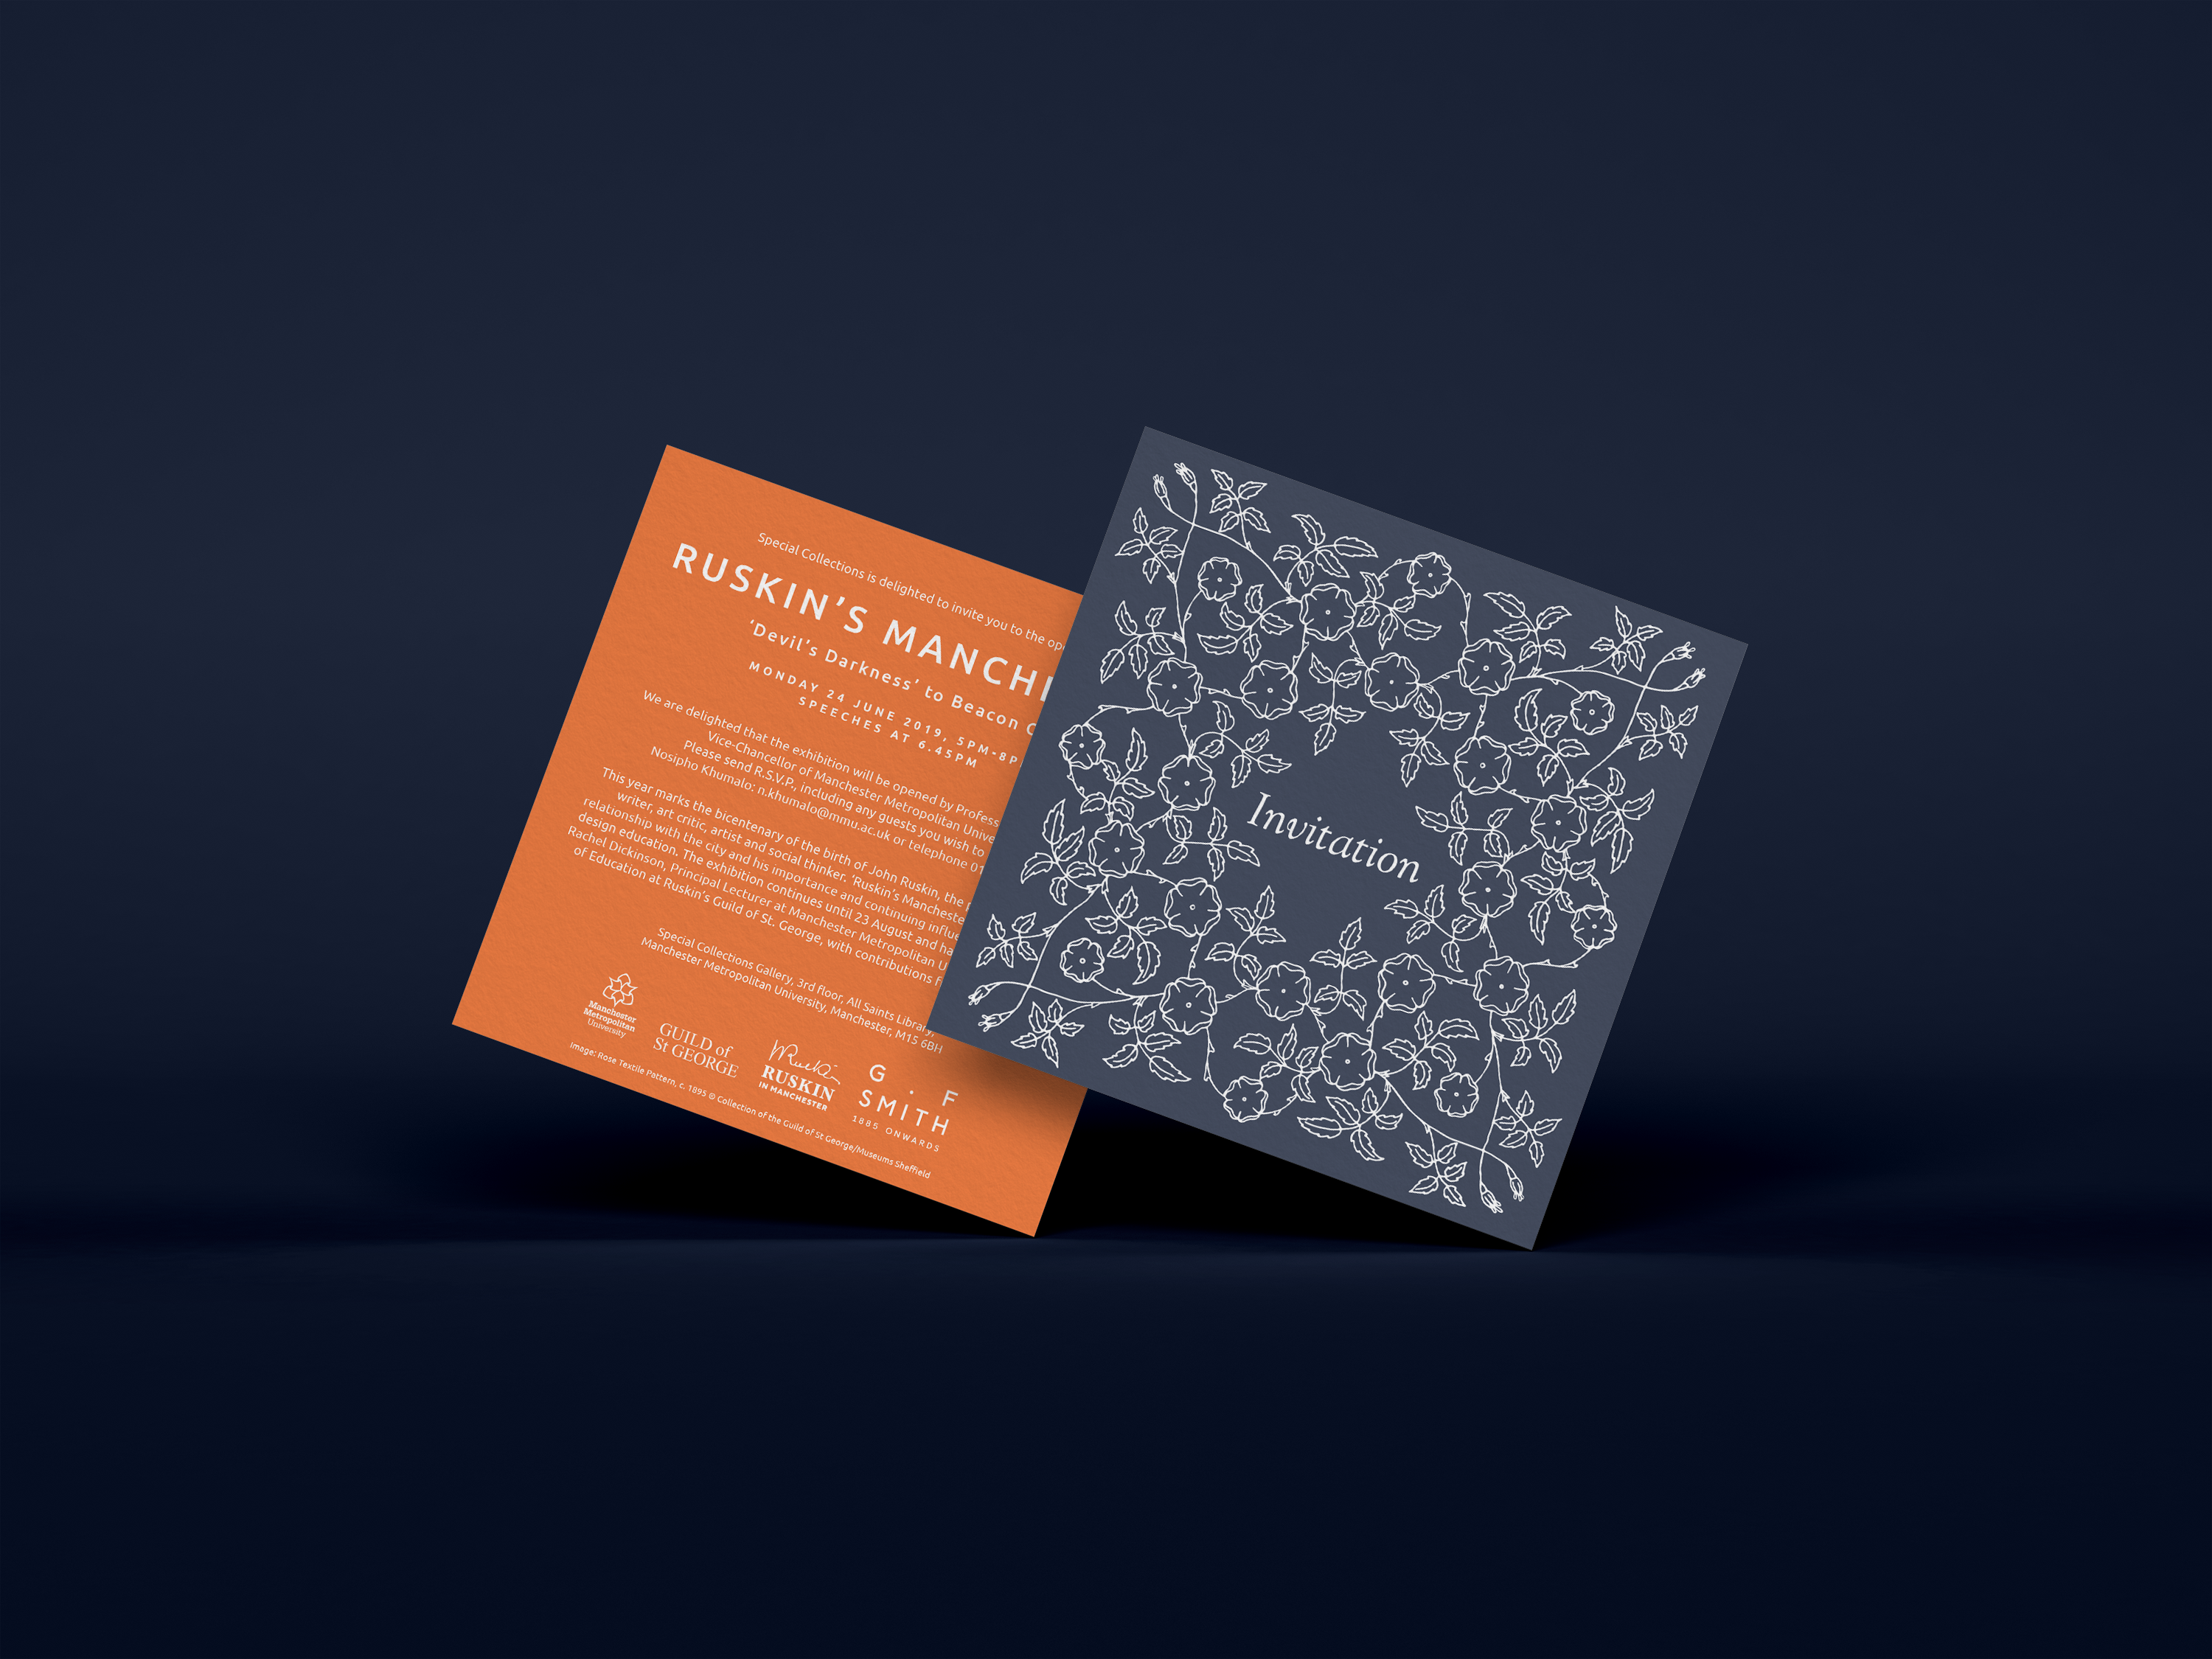 square invites, one side dark blue with floral pattern and word 'invitation' and the reverse orange with text about Ruskins Manchester exhibition